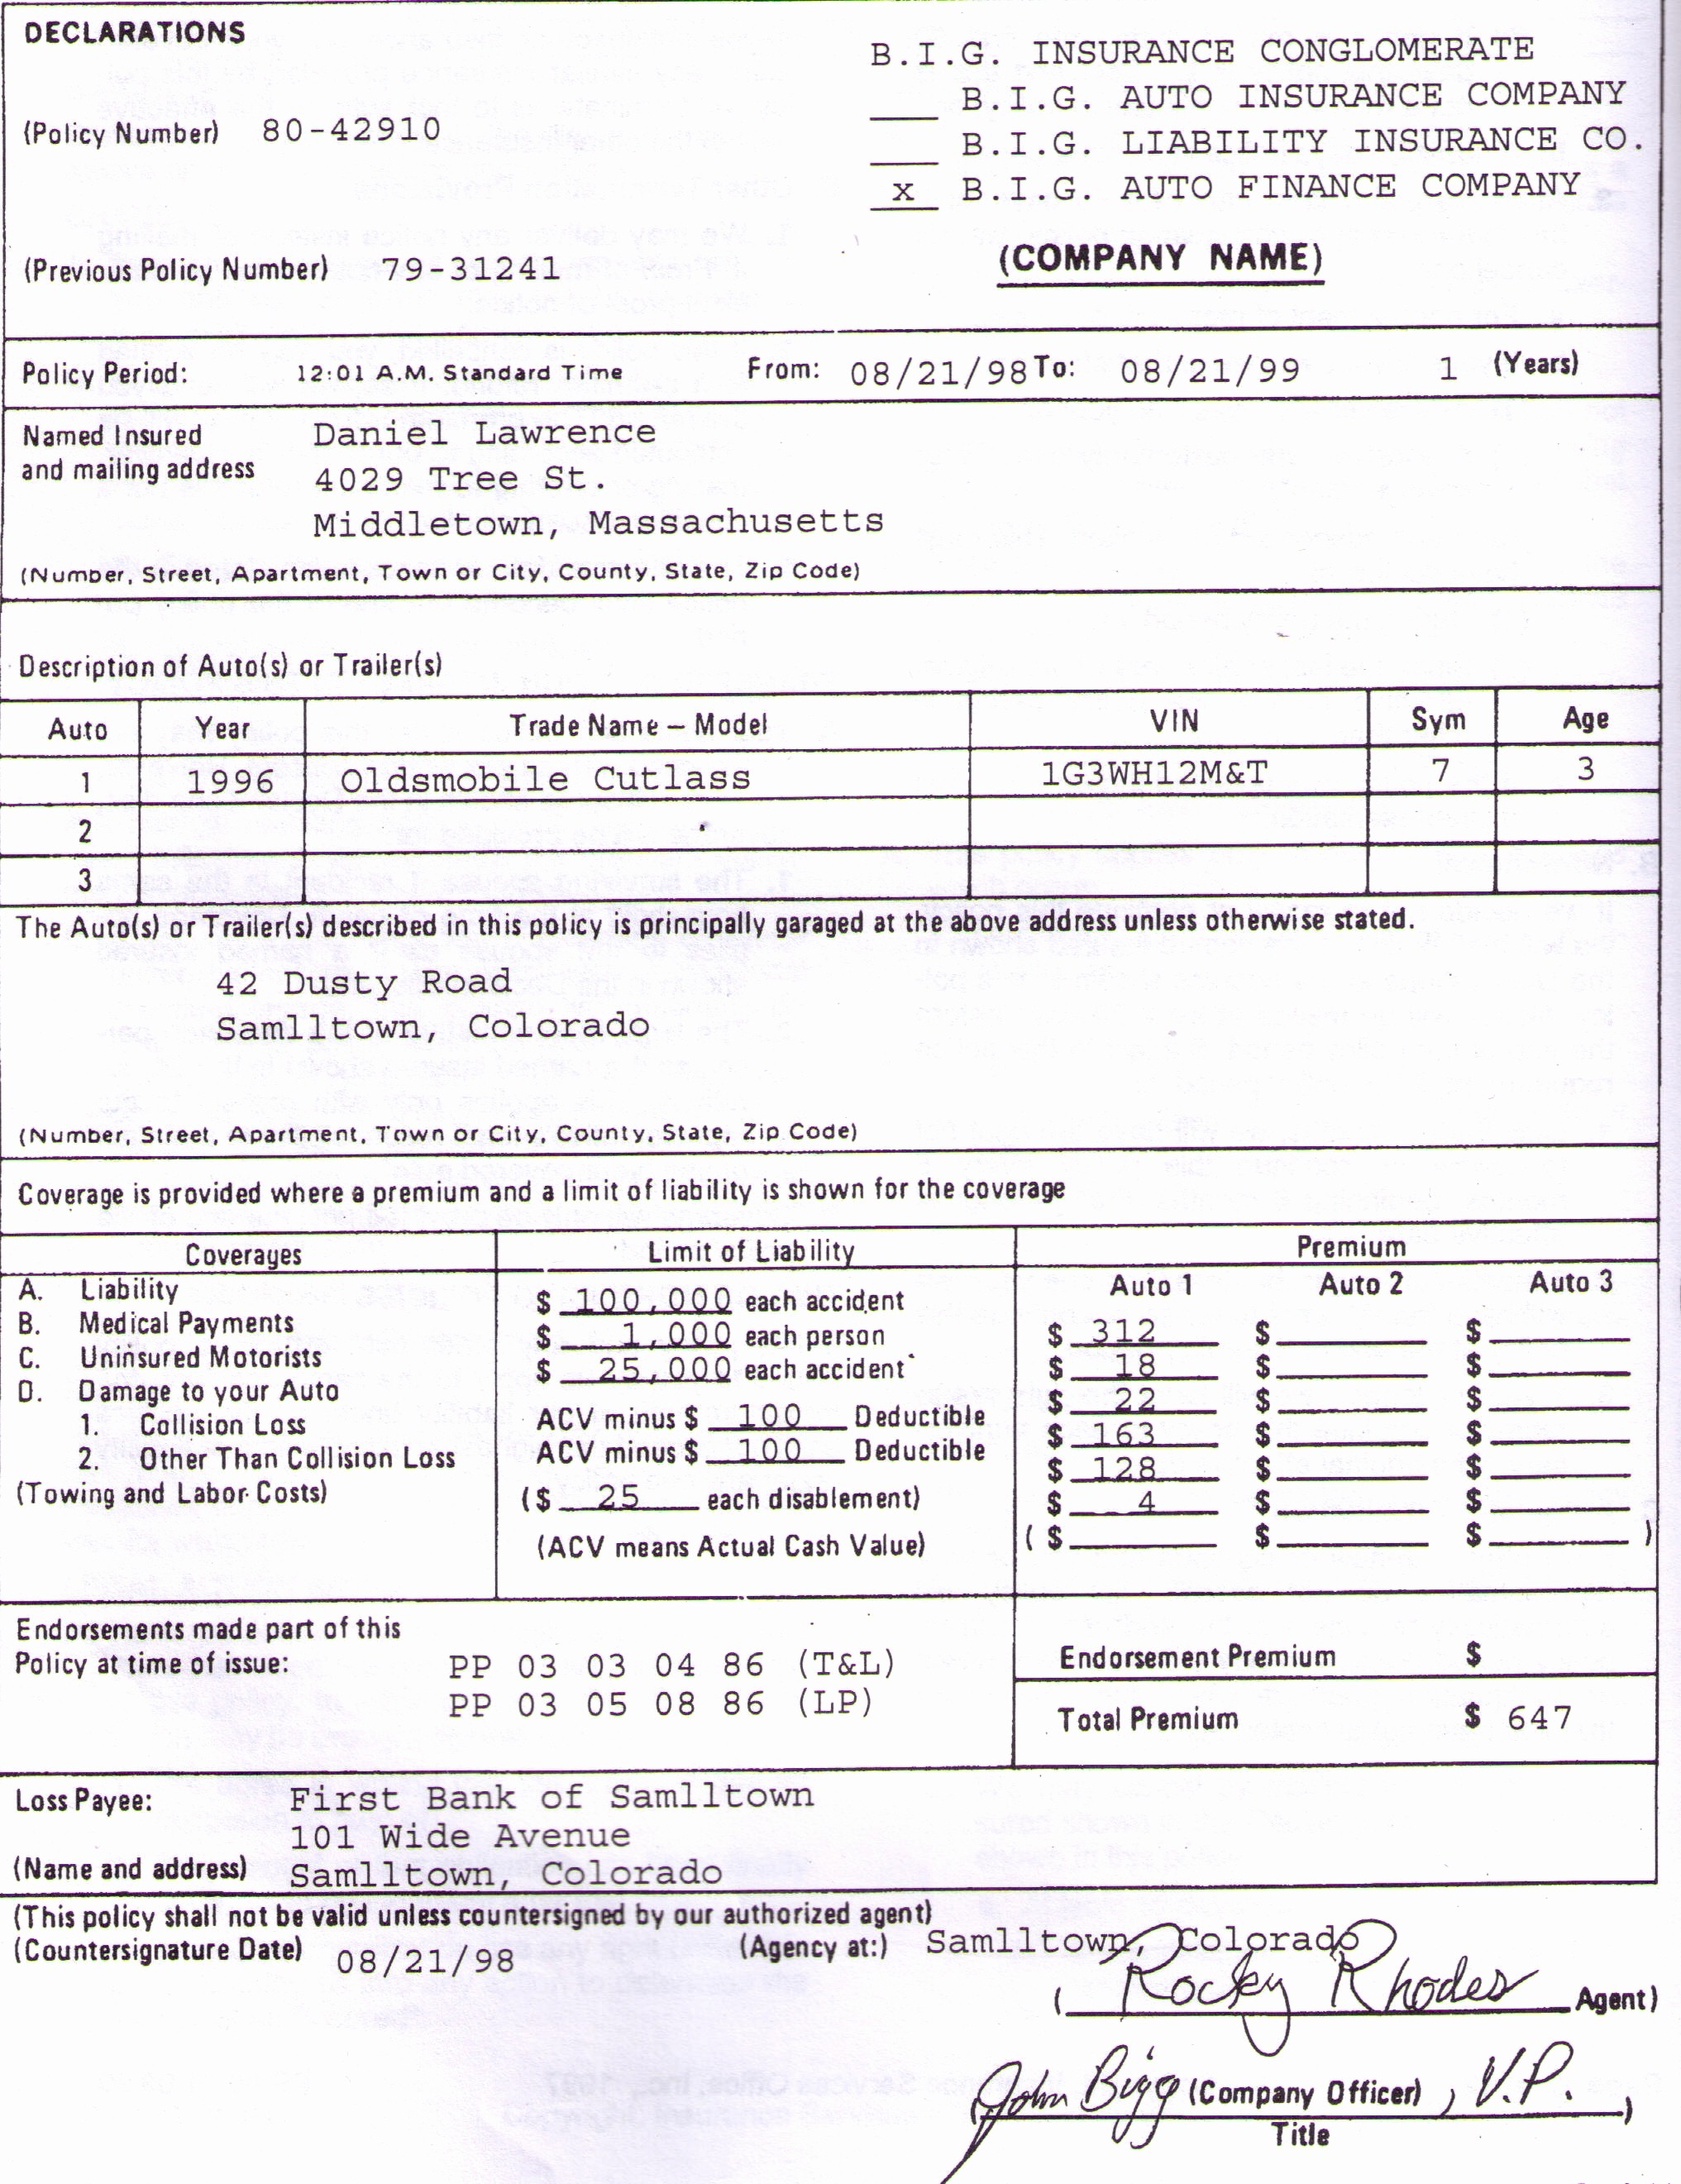 State Farm Declaration Page Sample Awesome Geico Home Insurance Document Example